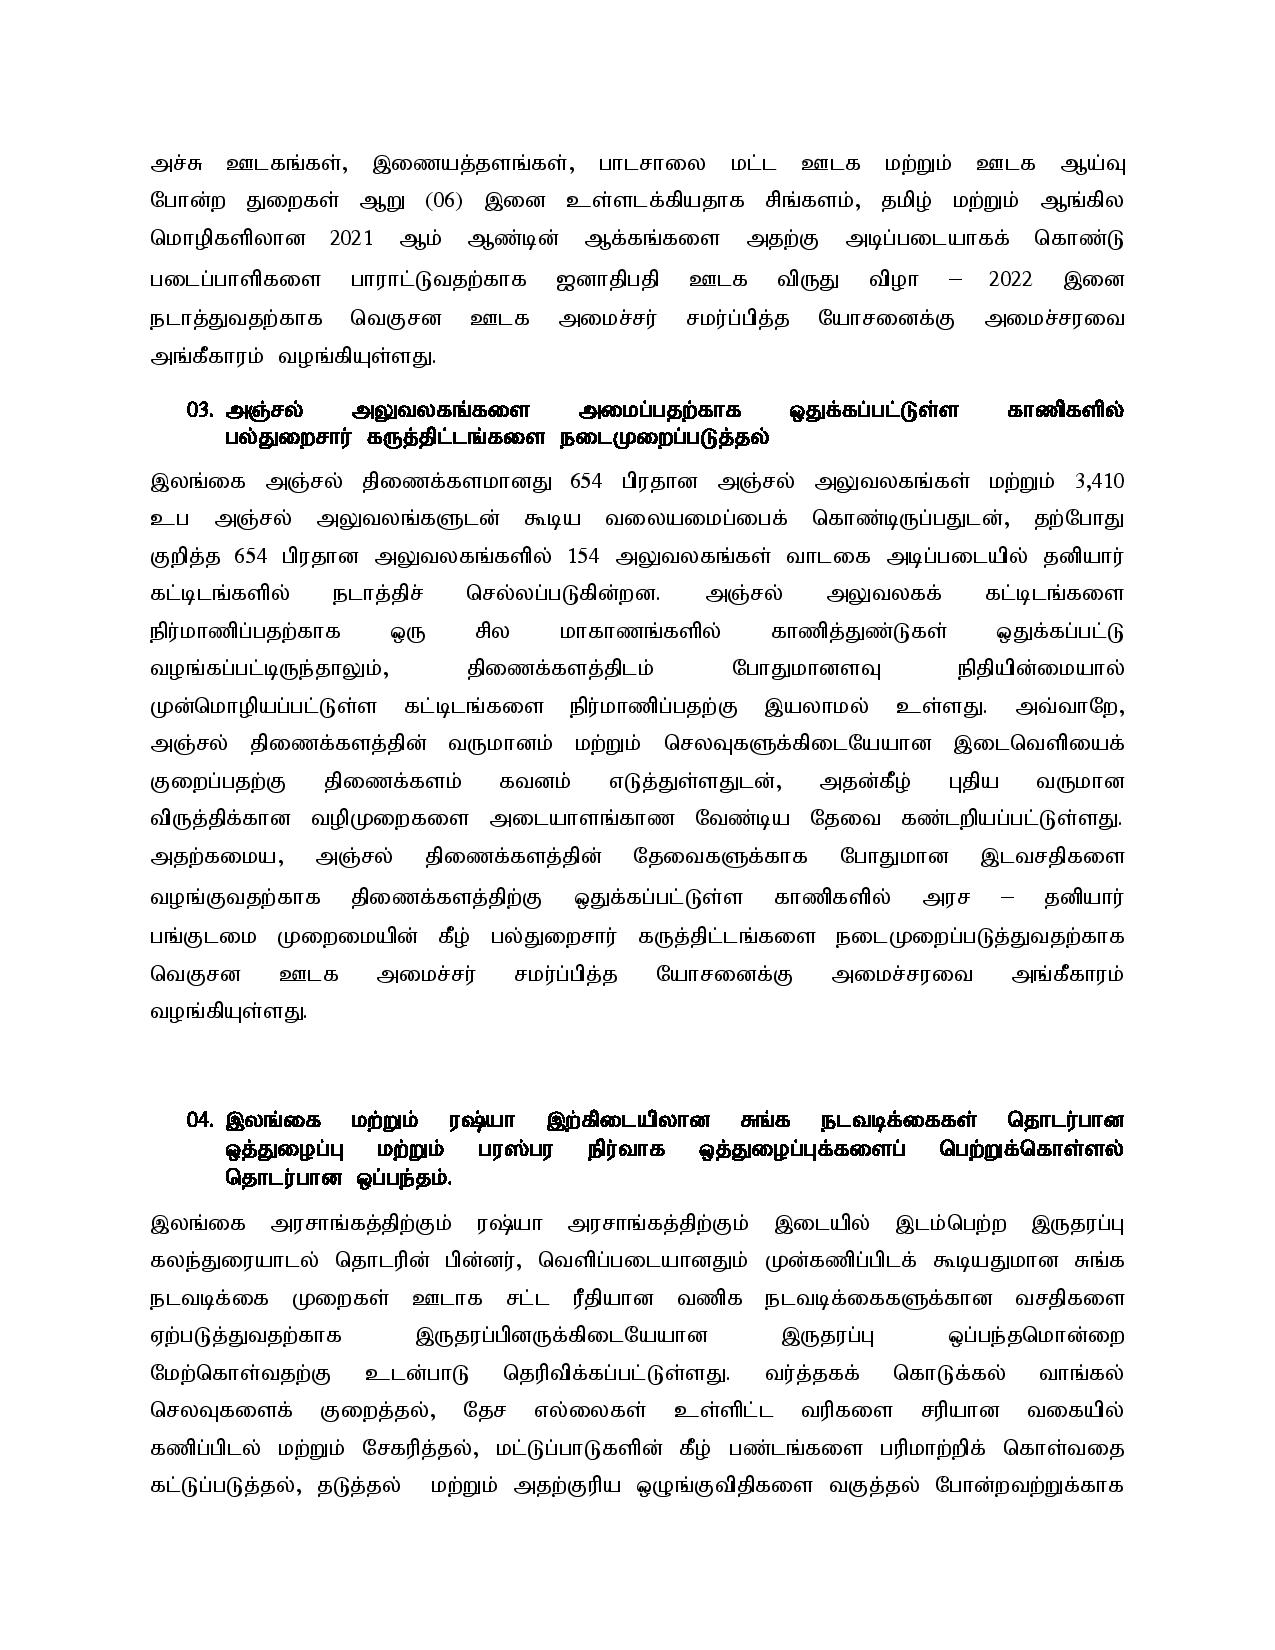 Cabinet Decision on 15.11.2021 Tamil page 002